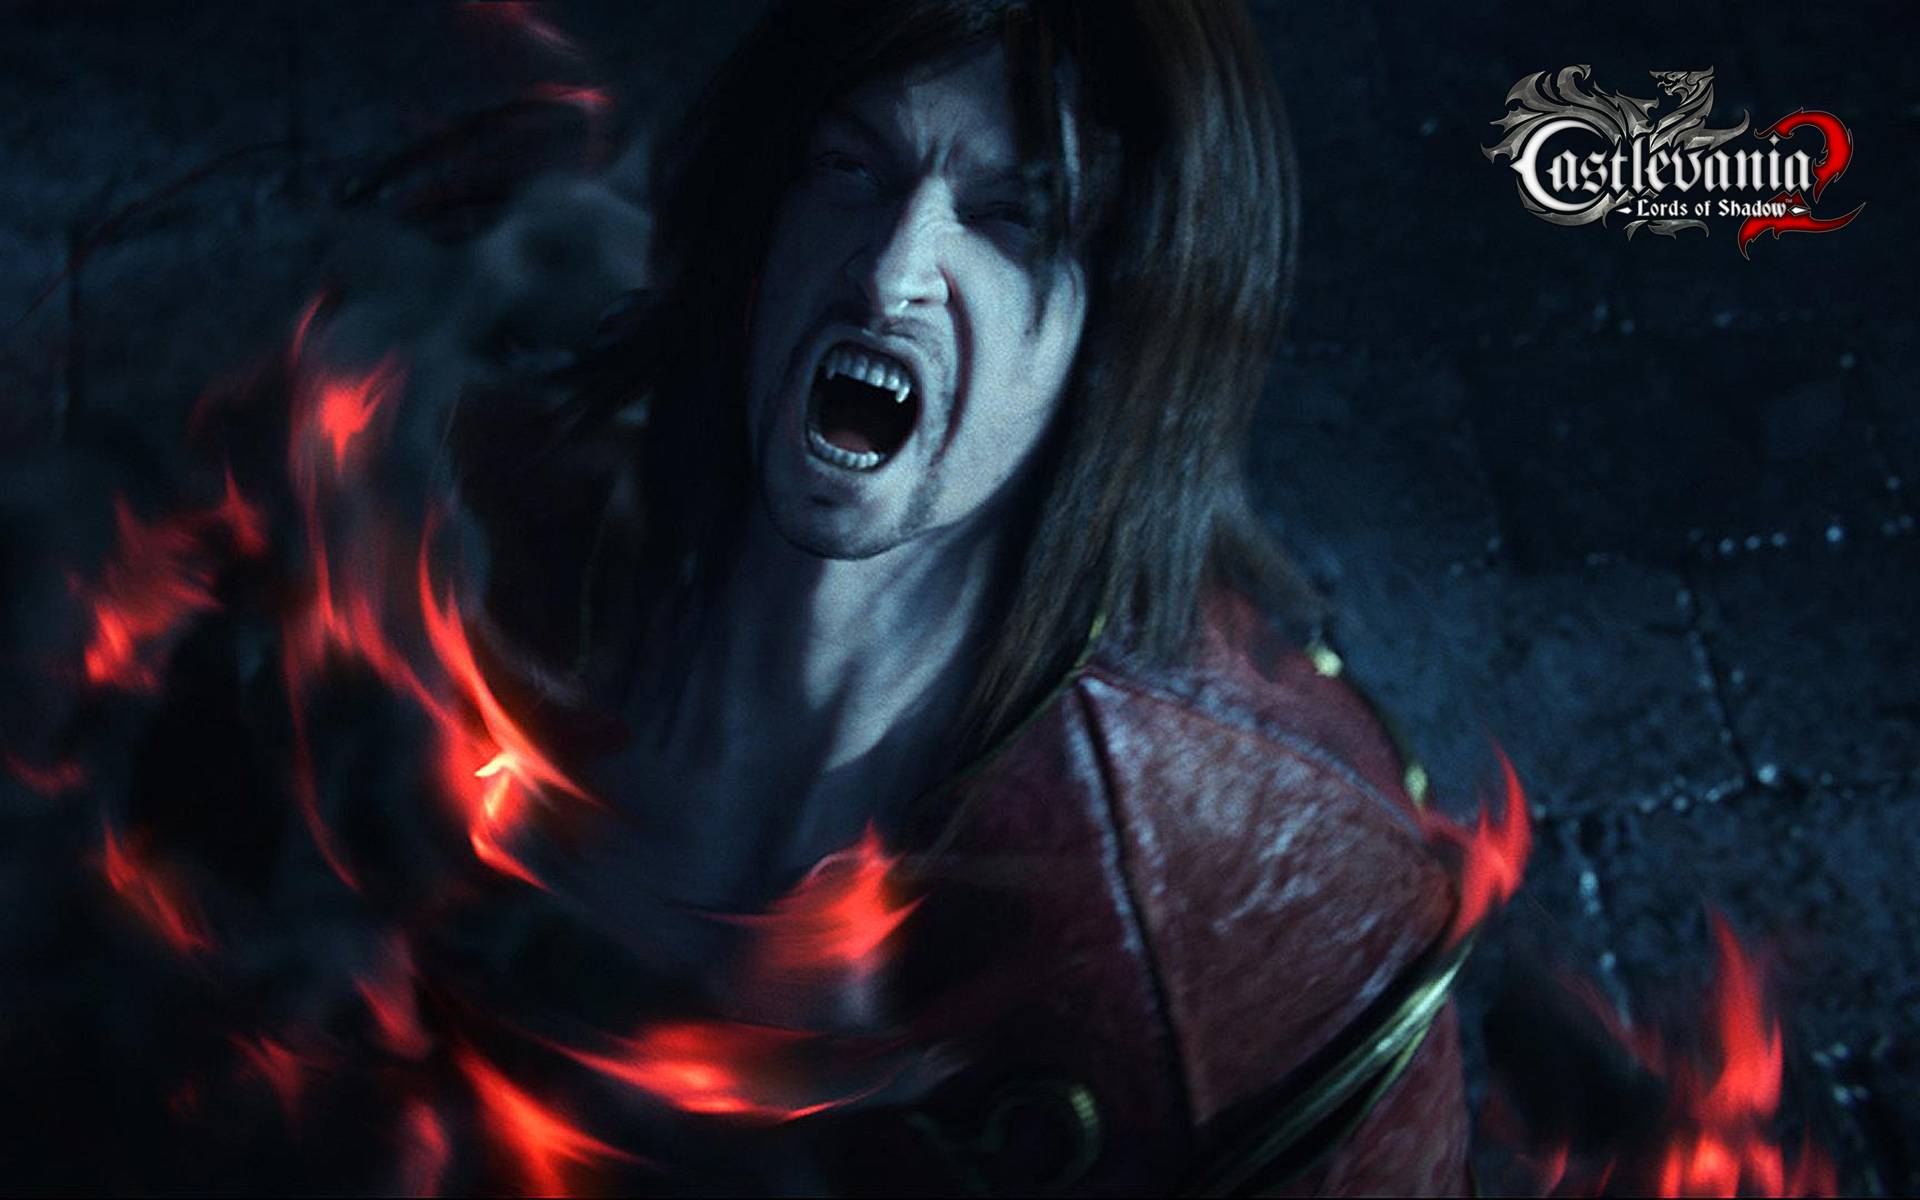 Castlevania Lords Of Shadow 2 Wallpaper in HD « Video Game News